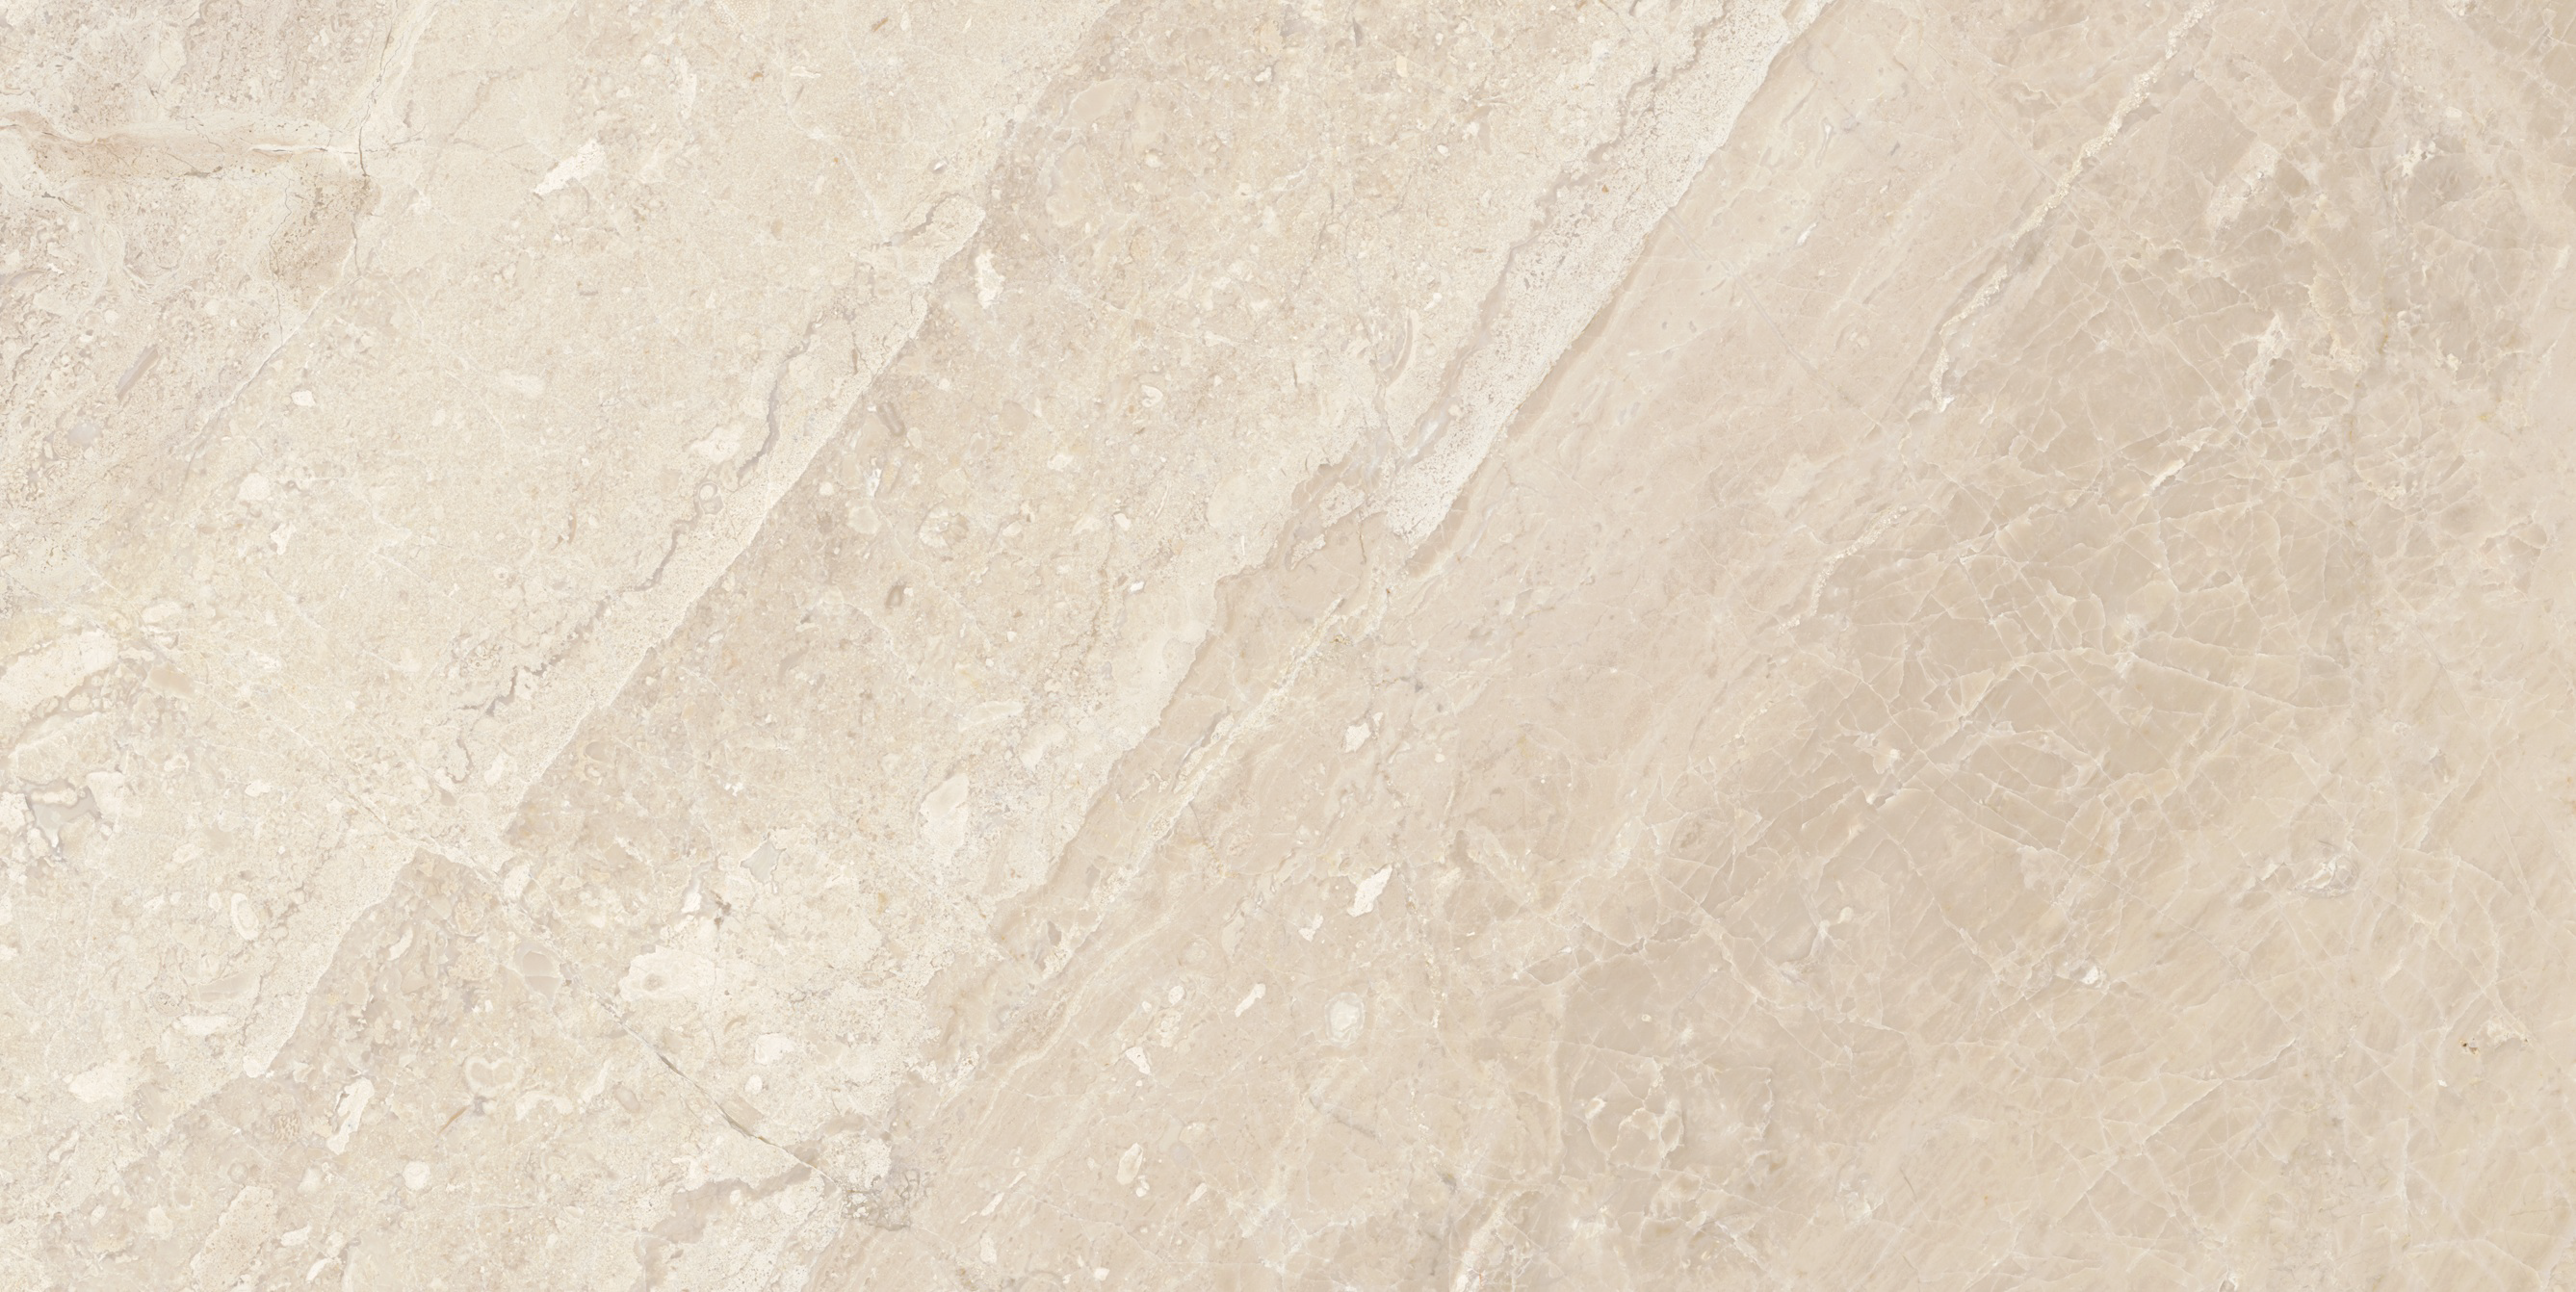 marble pattern natural stone field tile from impero reale anatolia collection distributed by surface group international polished finish straight edge edge 12x24 rectangle shape